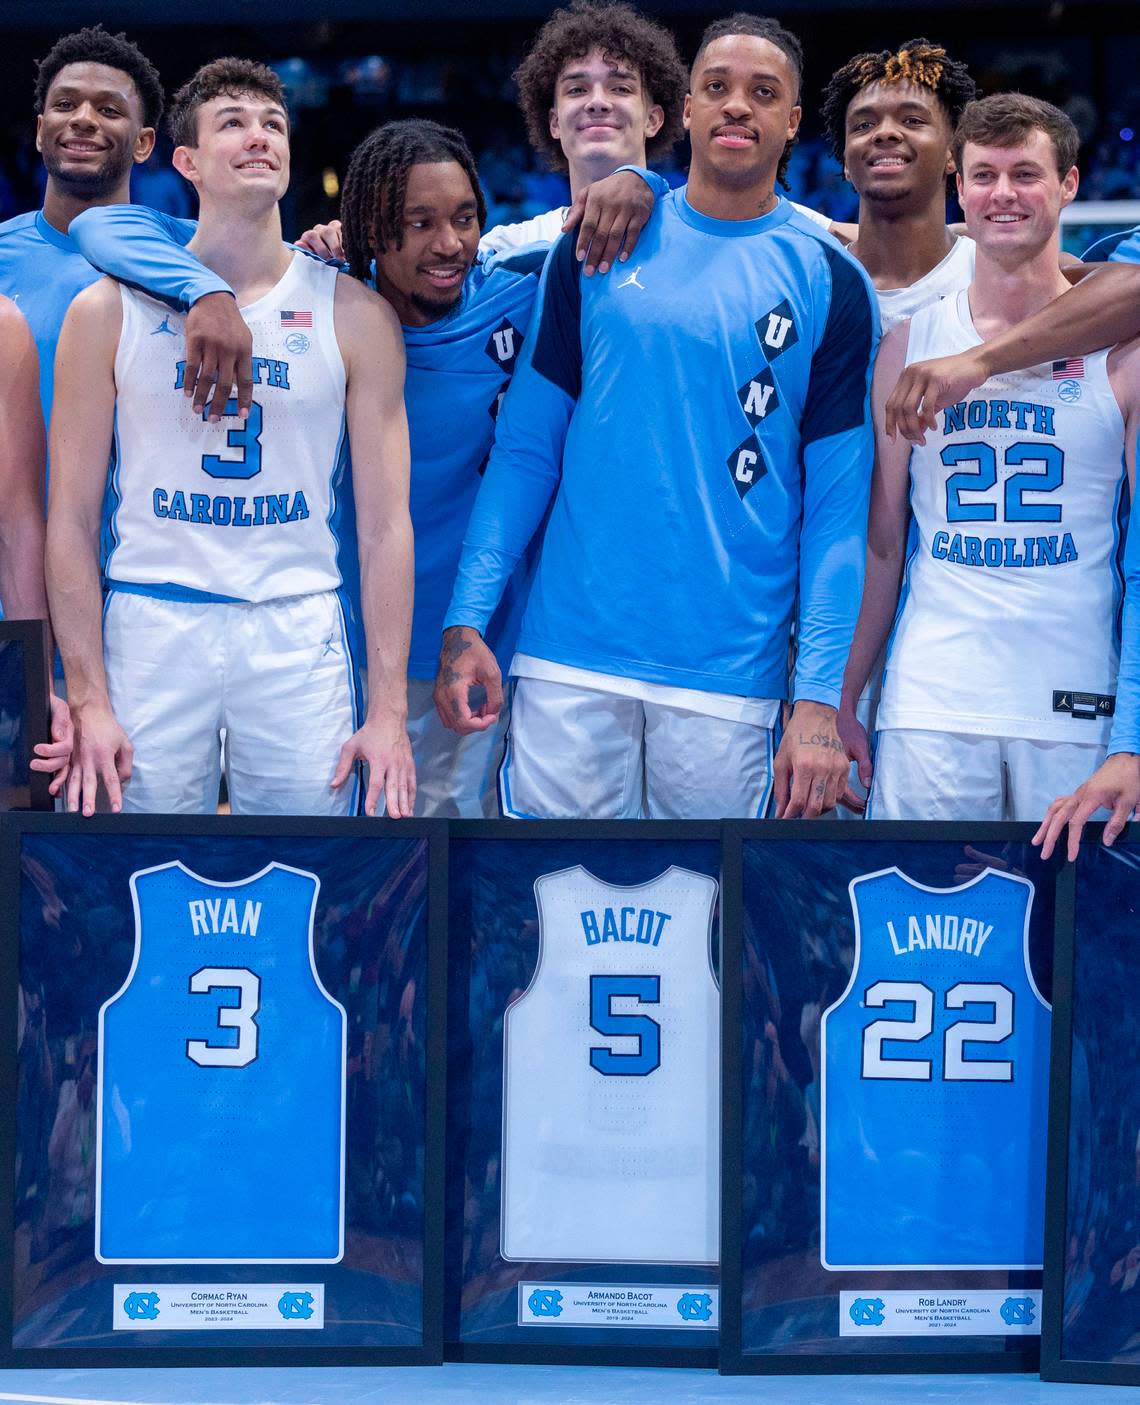 North Carolina’s Armando Bacot (5) is surrounded by teammates as he and other seniors including Cormac Ryan and Rob Landry (22) are honored prior to their final home game against Notre Dame on Tuesday, March 5, 2023 at the Smith Center in Chapel Hill, N.C.